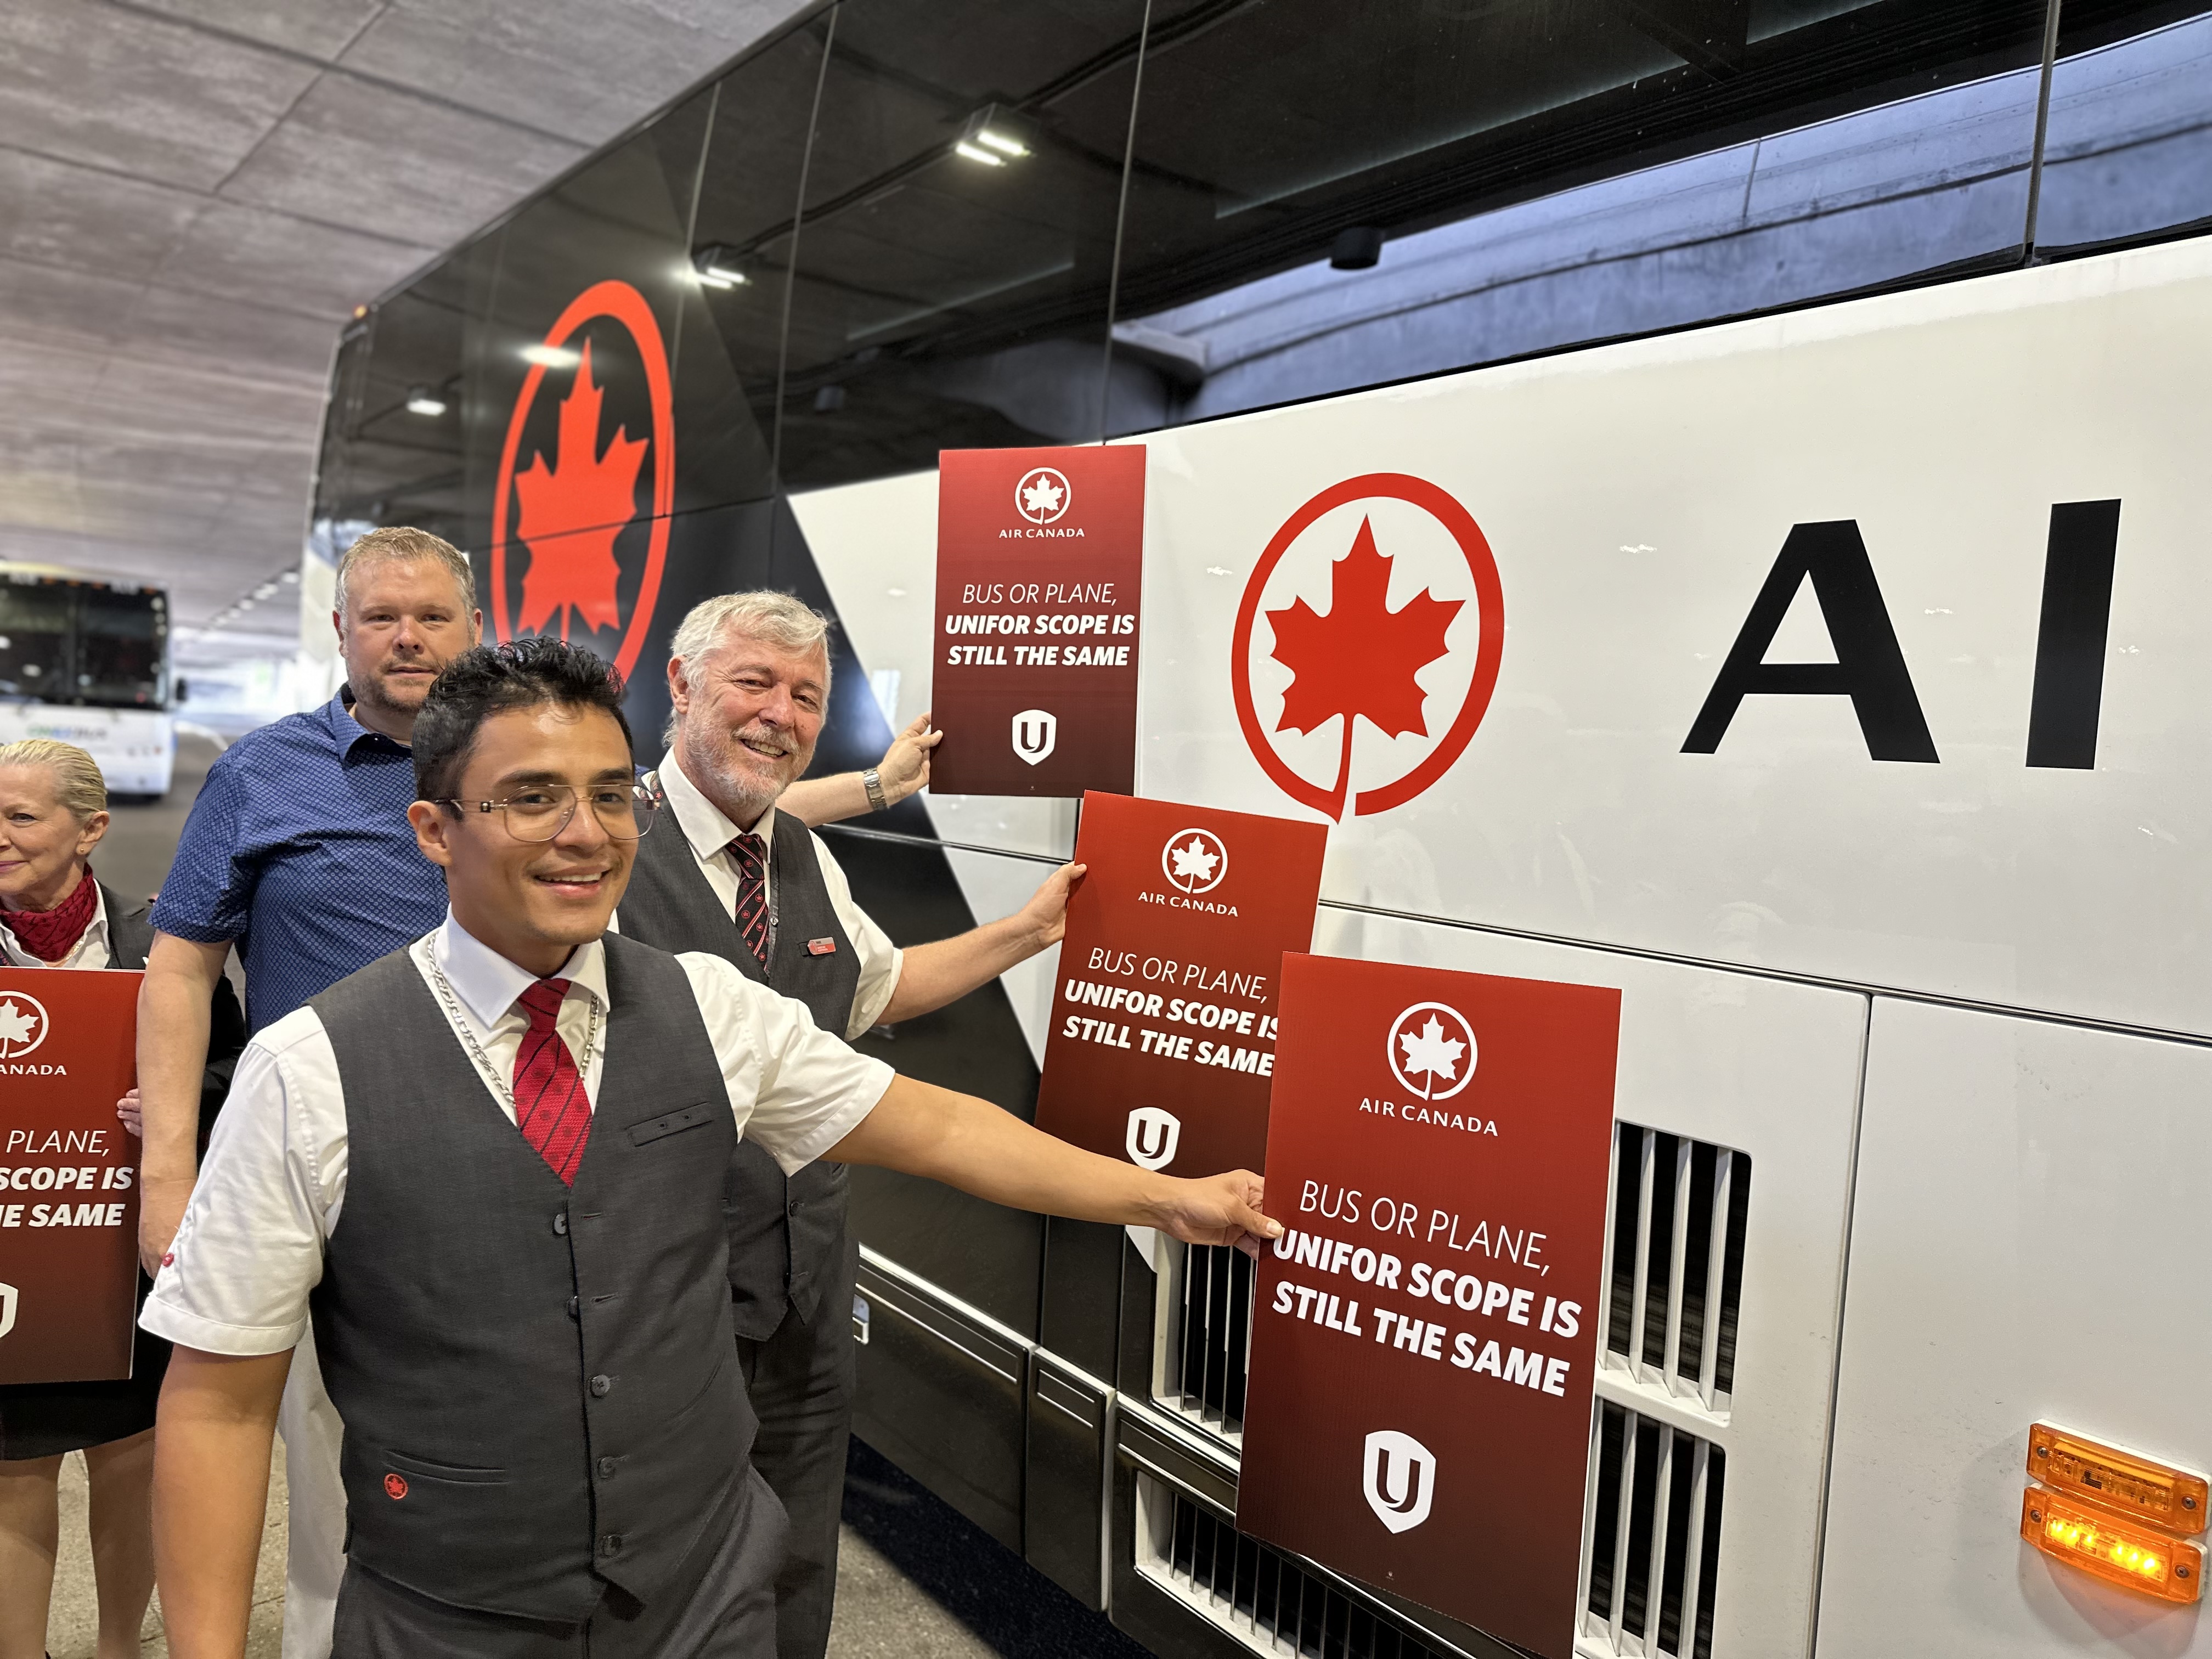 Three men hold up place cards in front of a Air Canada bus that read : Bus or plane Unifor scope is the same